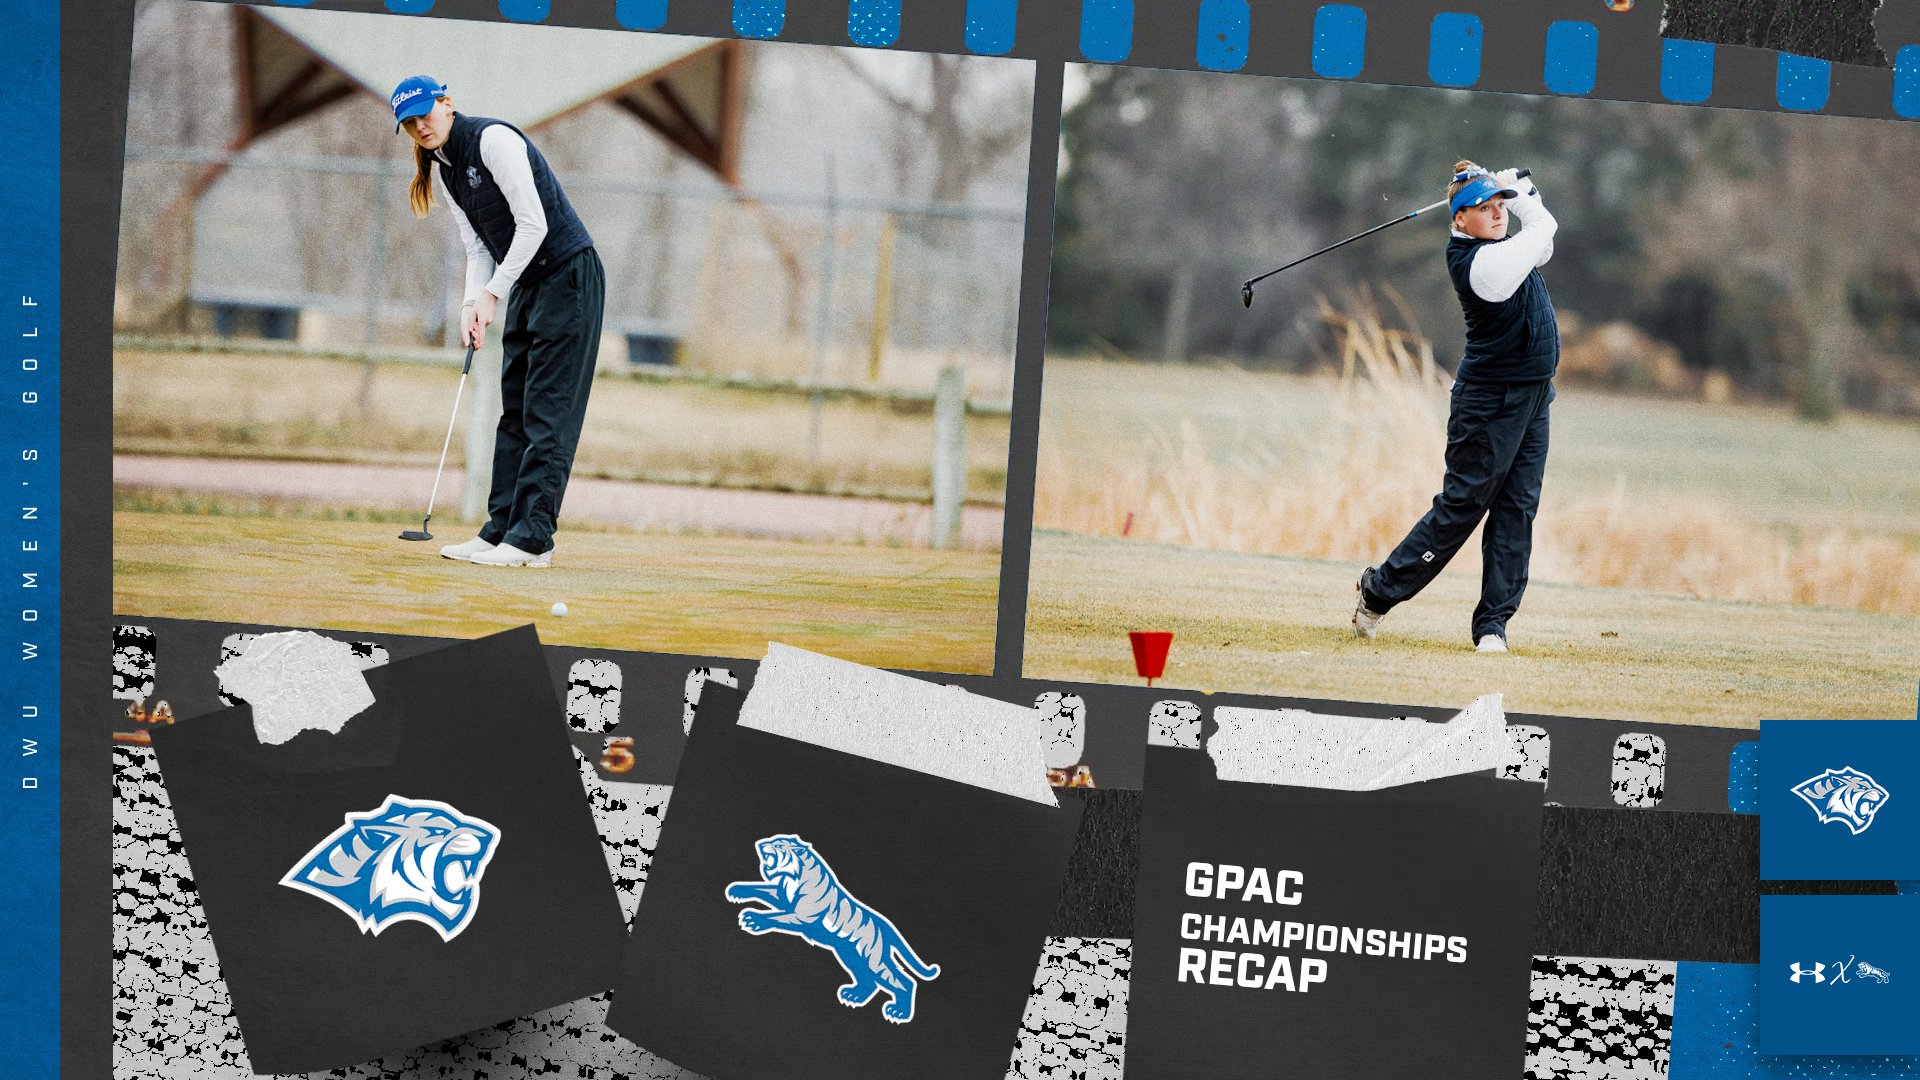 SUNDENGA AND MONCUR EARN FIRST TEAM ALL-CONFERENCE HONORS AT GPAC CHAMPIONSHIPS